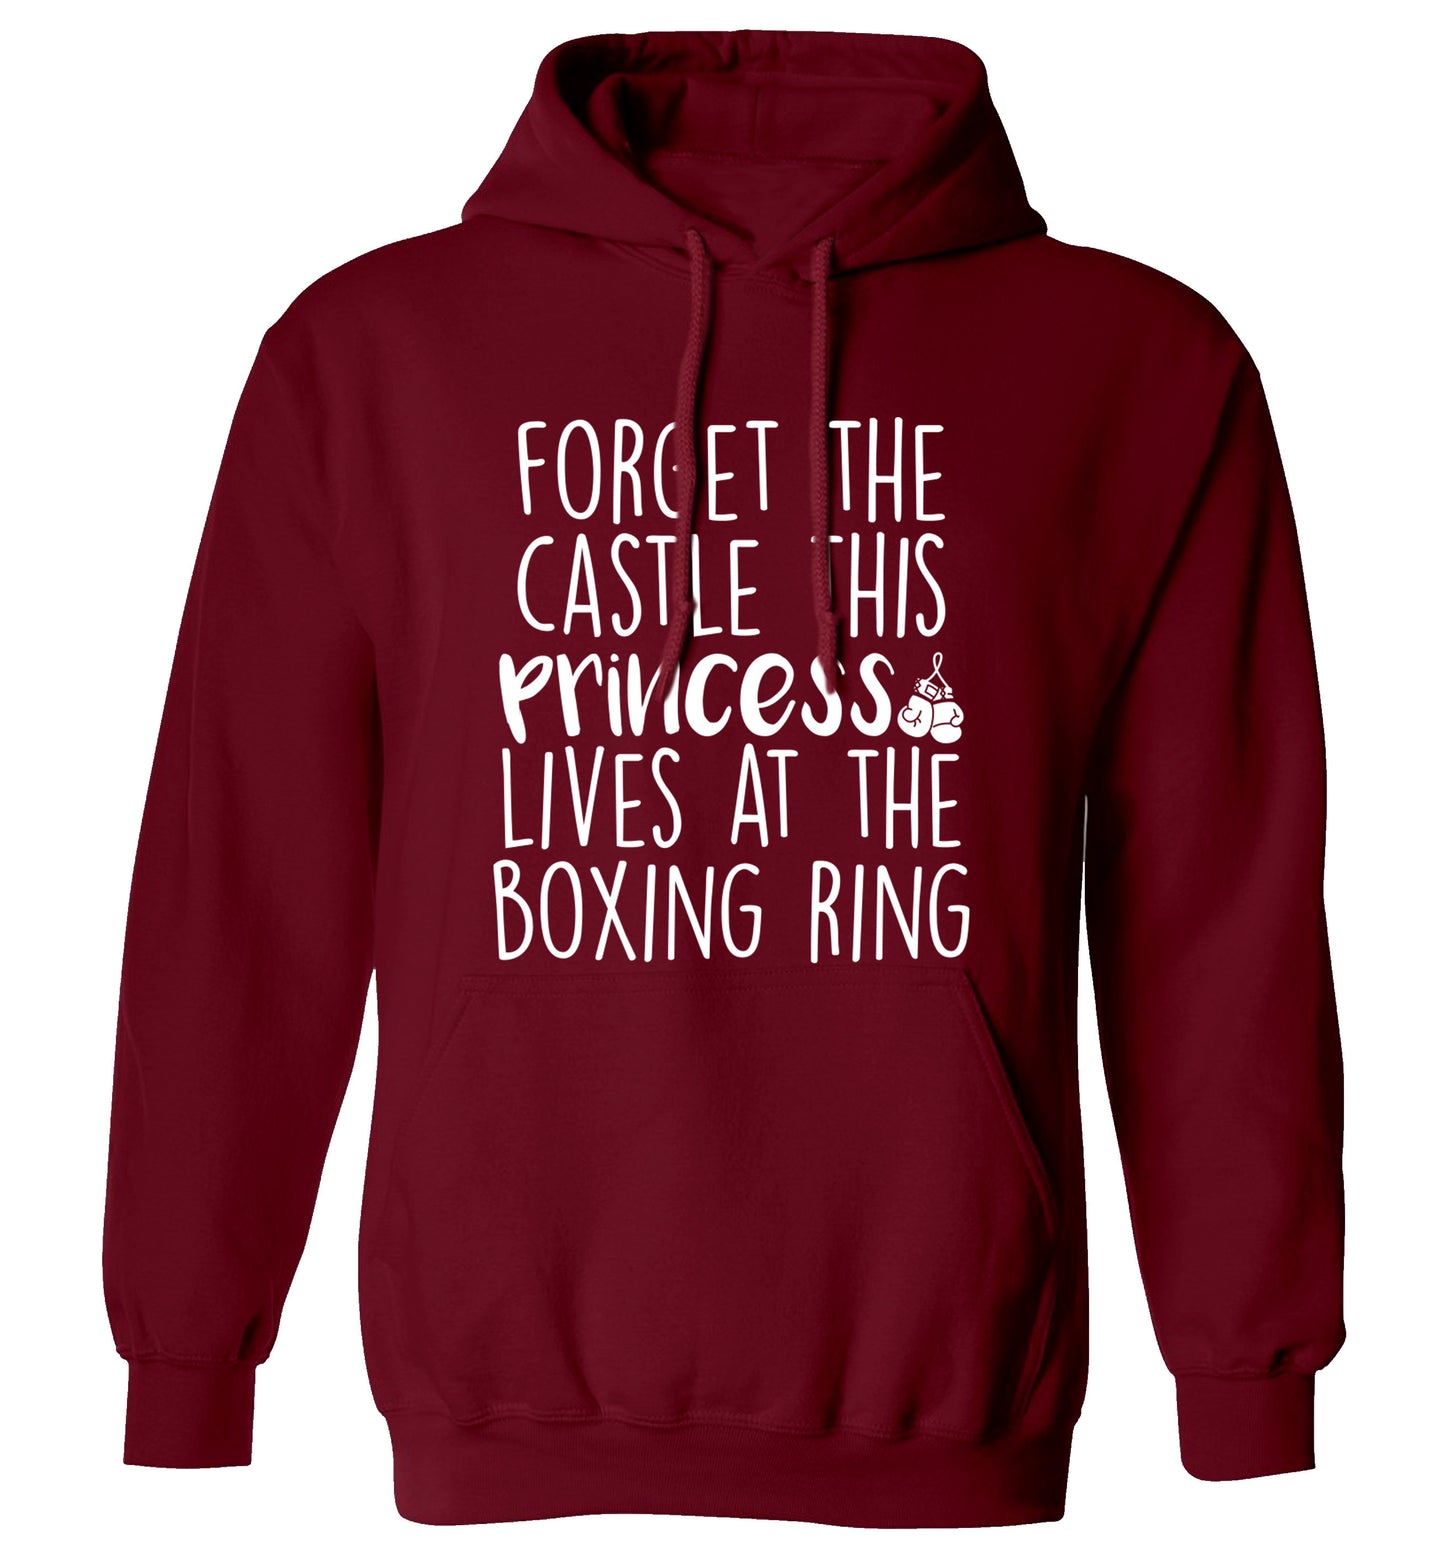 Forget the castle this princess lives at the boxing ring adults unisex maroon hoodie 2XL